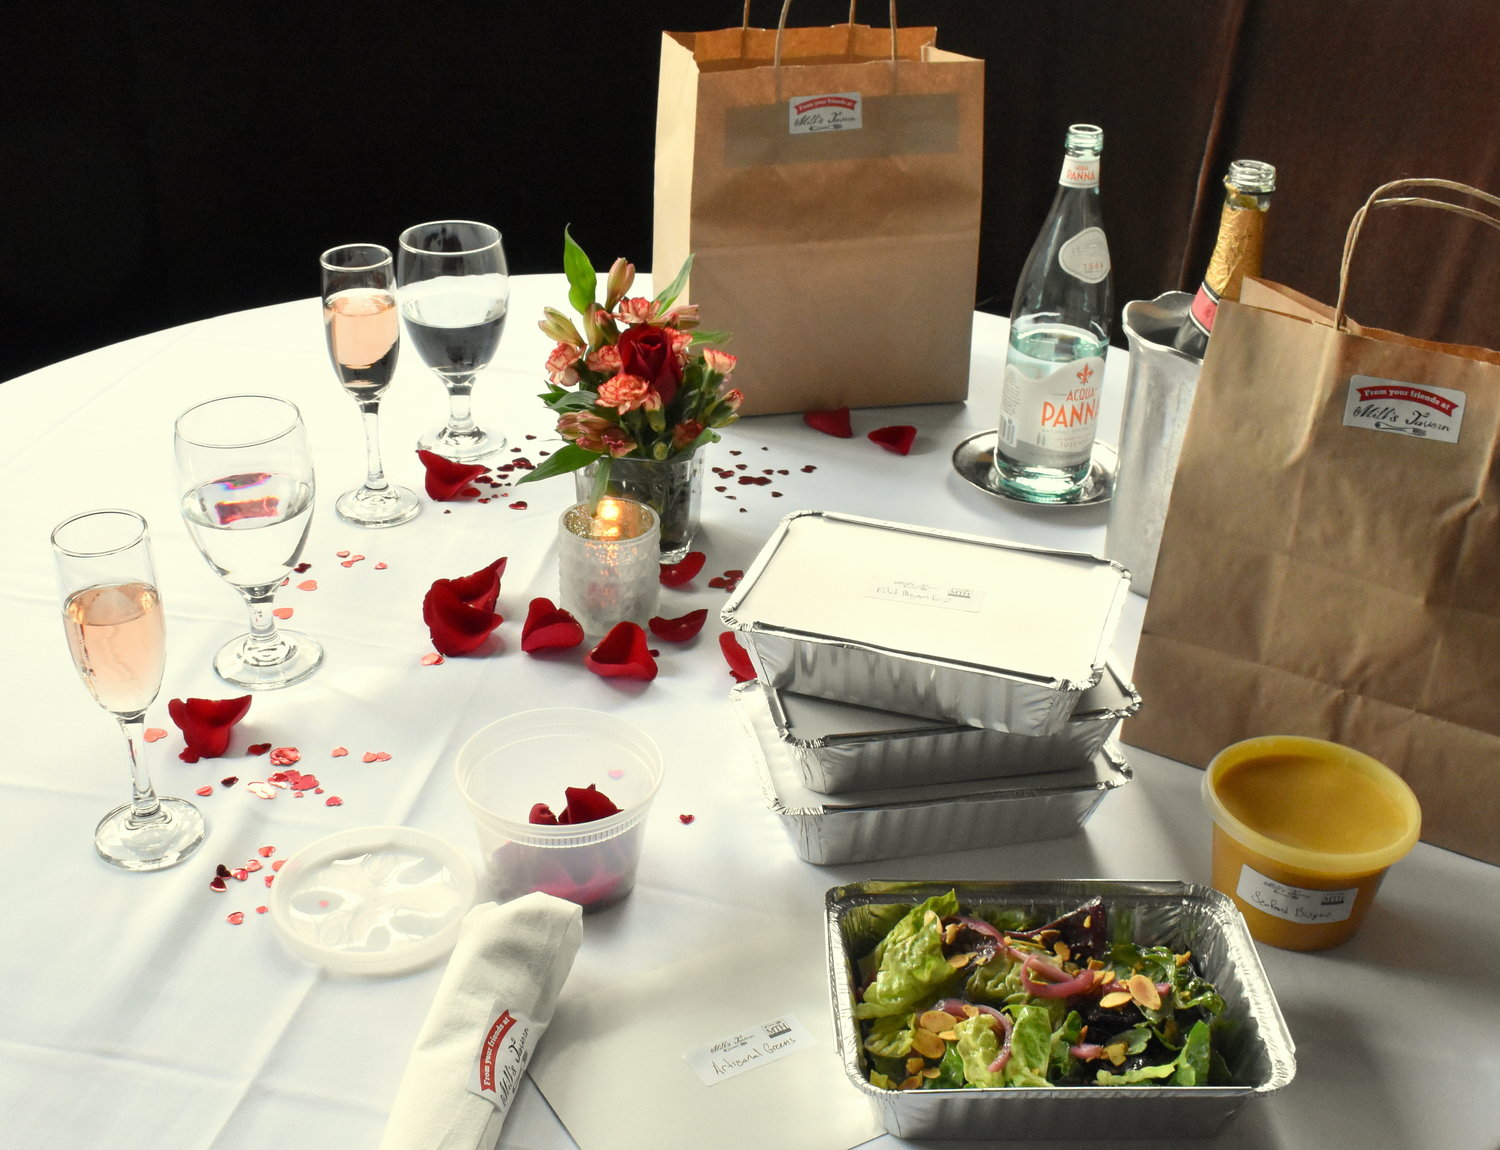 Order takeout from Mill's Tavern for a romantic dinner at home